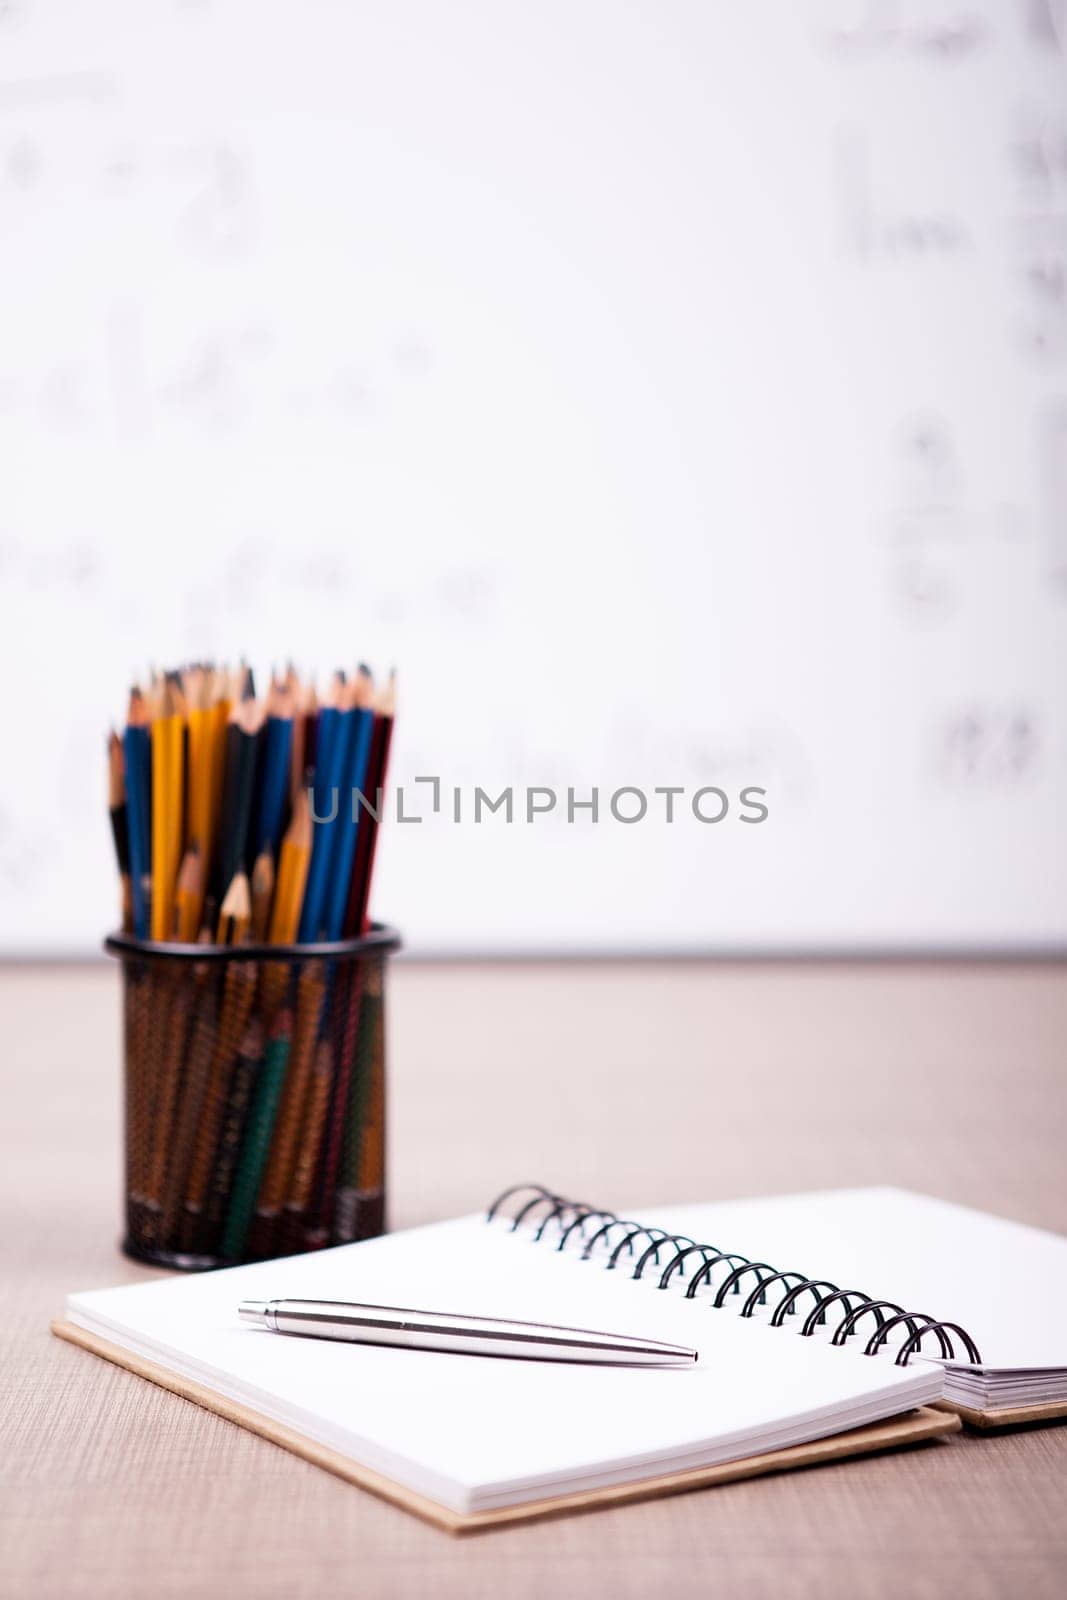 Books, notebook and pencils on table with a blurred white board in the back. School concept